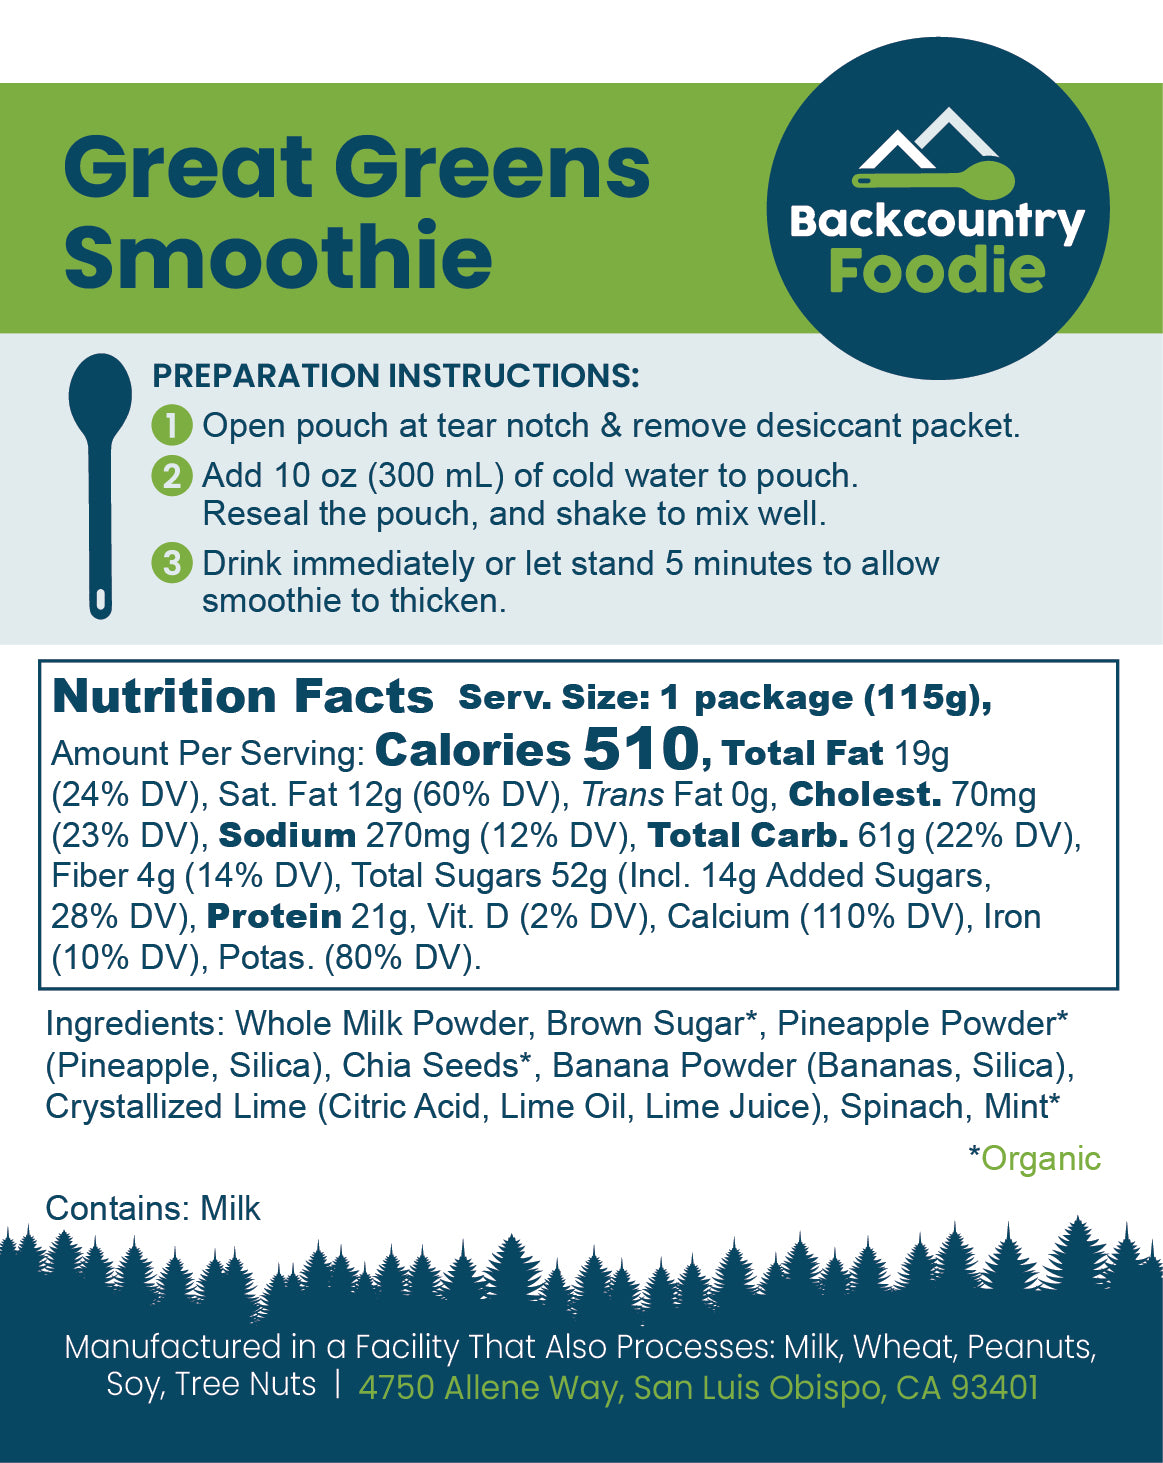 Backcountry Foodie - Great Greens Smoothie